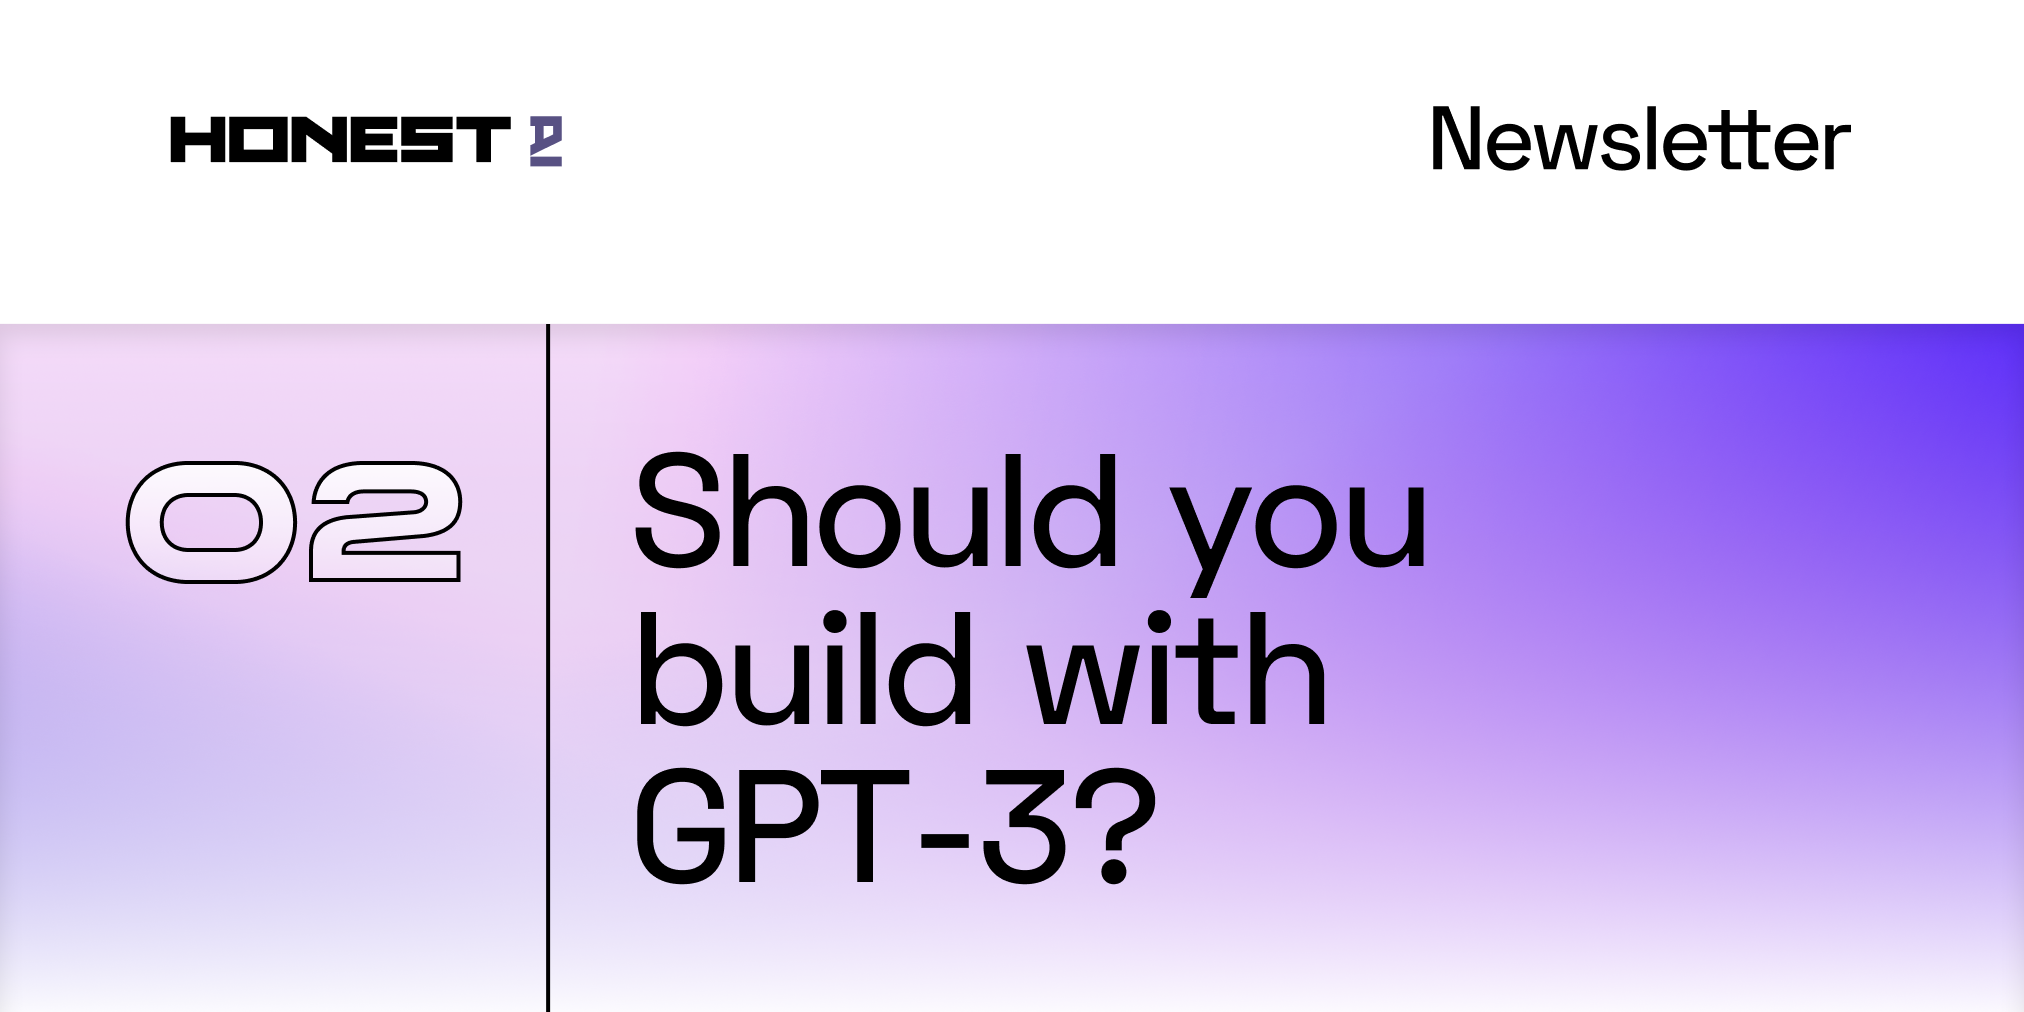 Honest-02: Should you build with GPT-3?